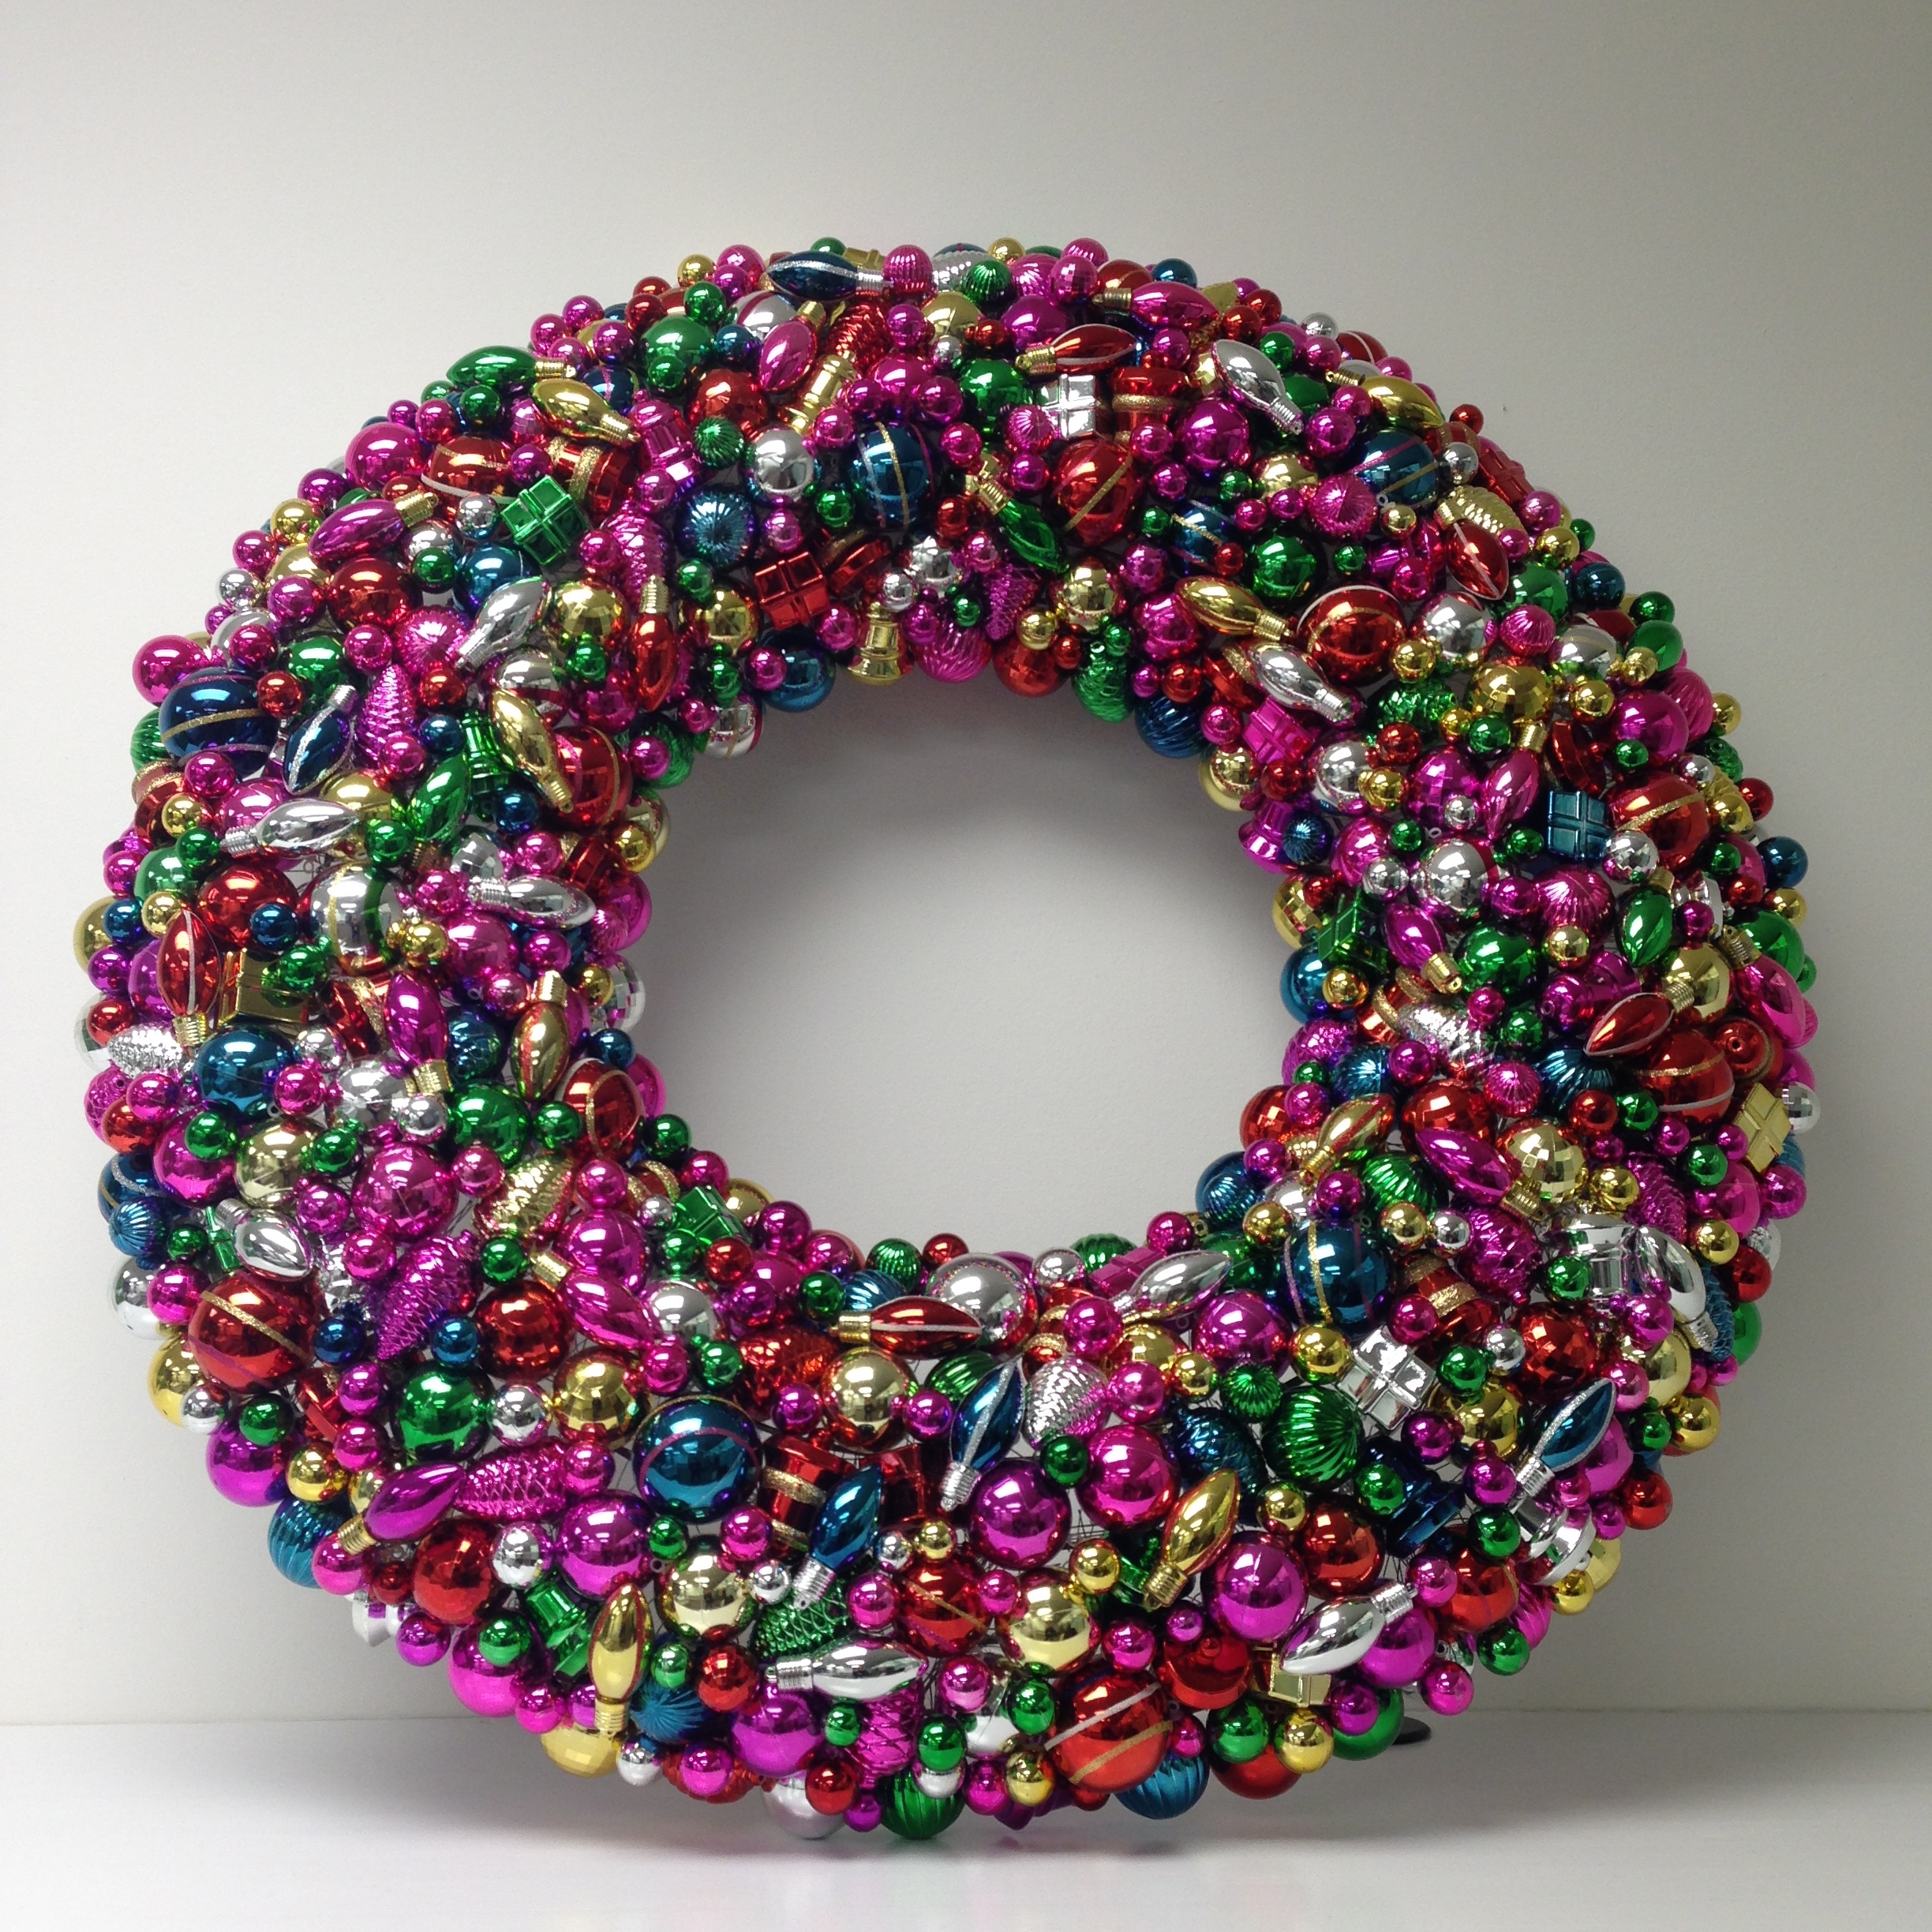 Bright Christmas Ornament Wreath donated by Craig Bachman Imports